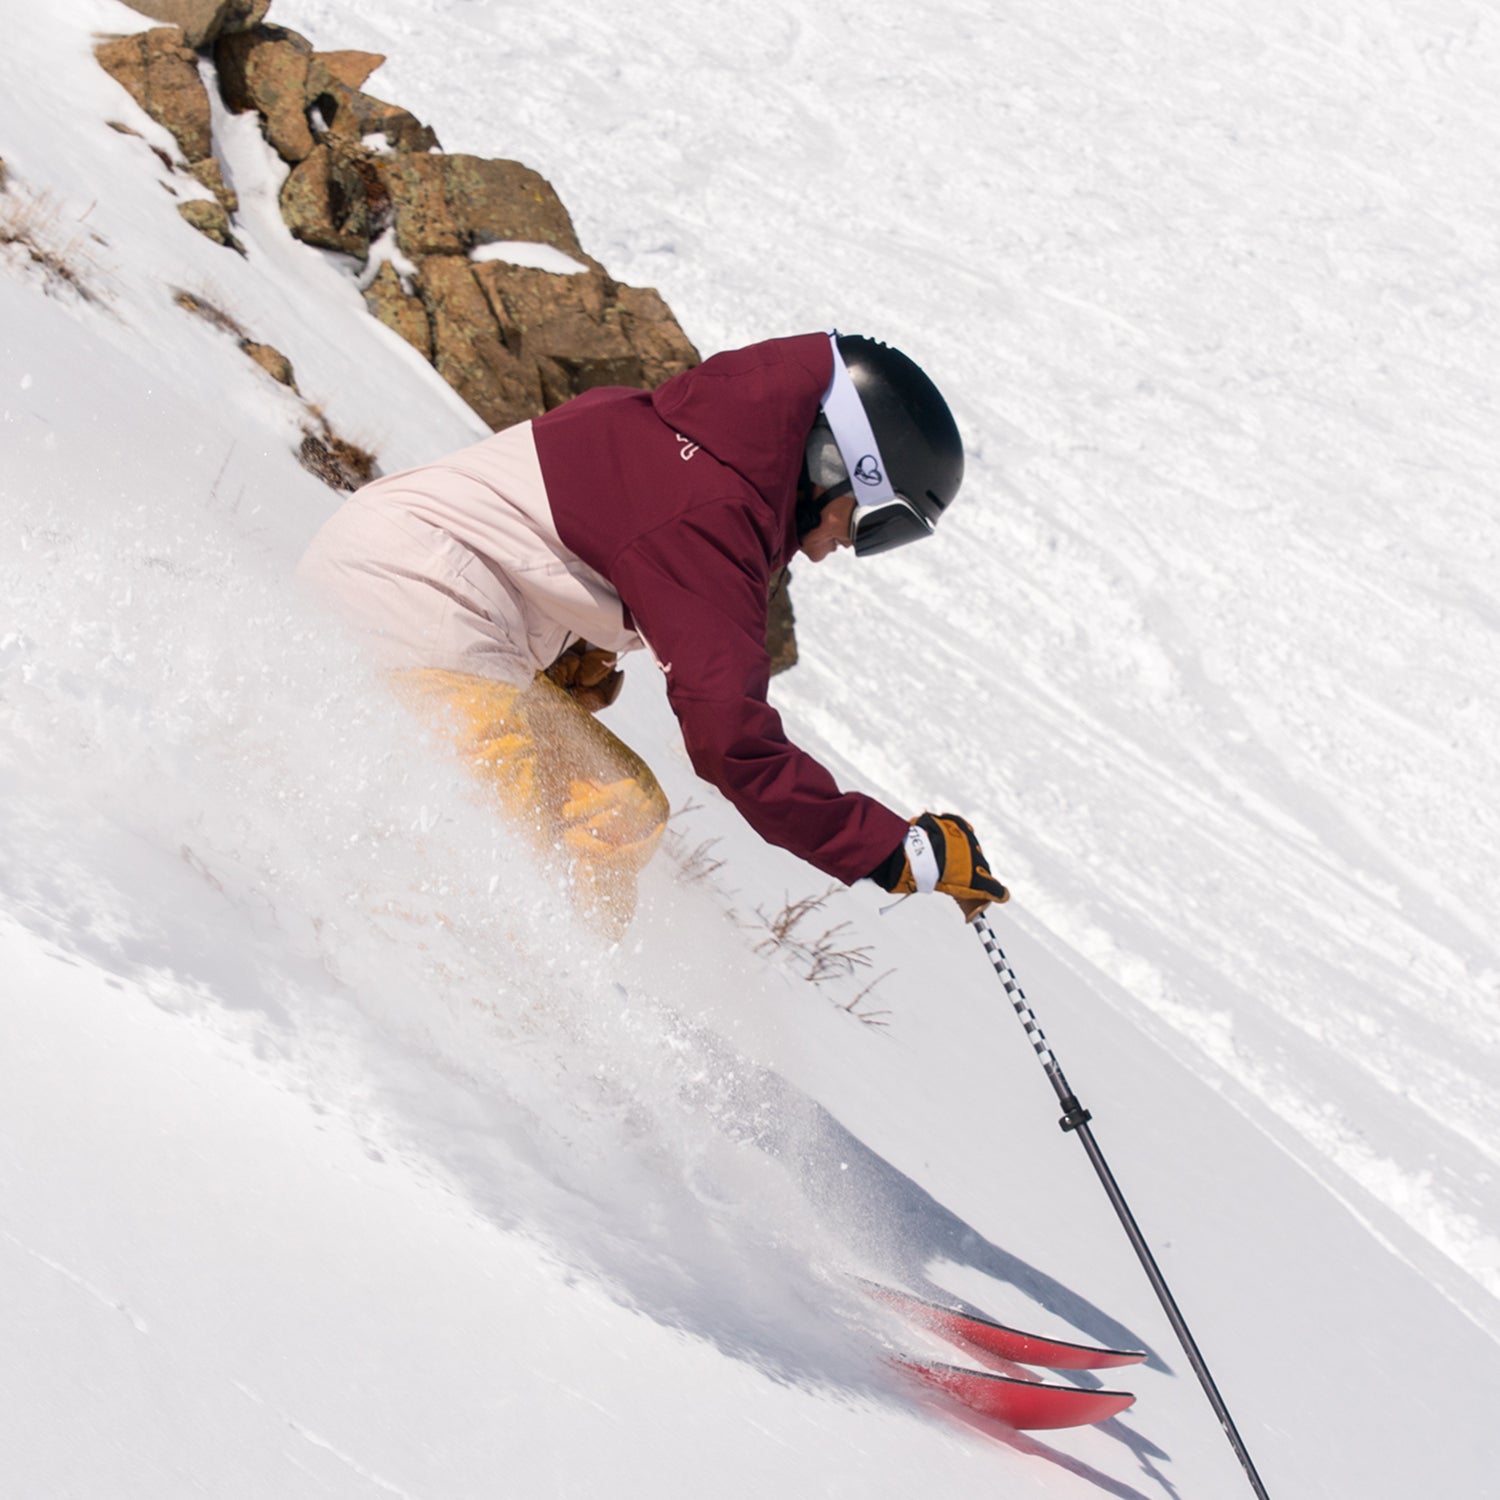 Three Factors You Should Consider When Buying a Ski Shell